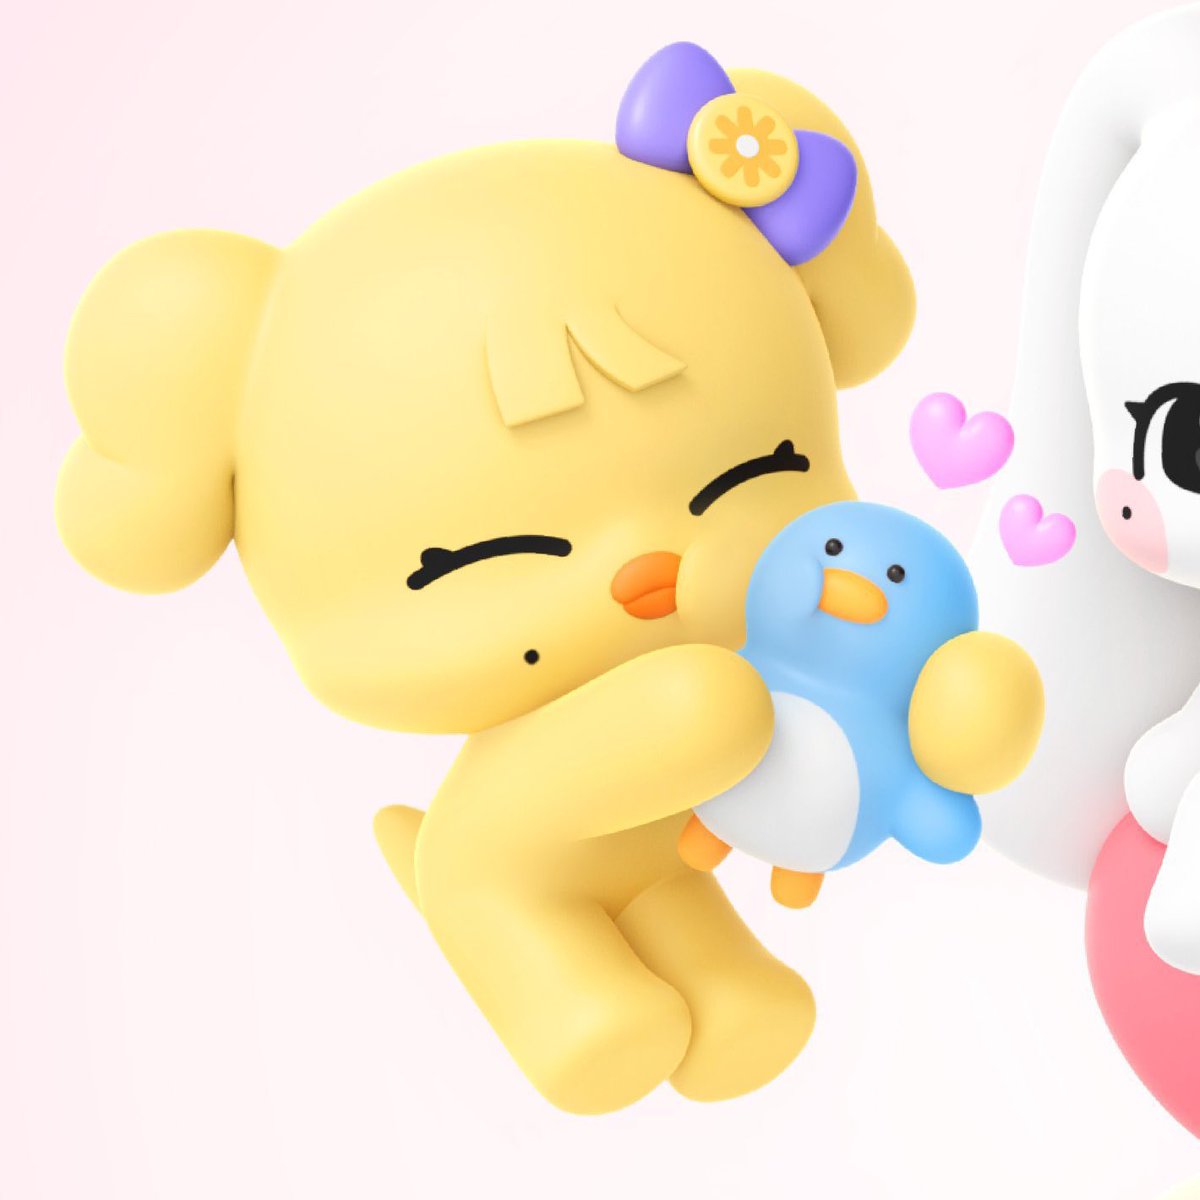 Ppo-ppo is Rei’s penguin carebear stuffed animal that recently got featured in Minive 🐧